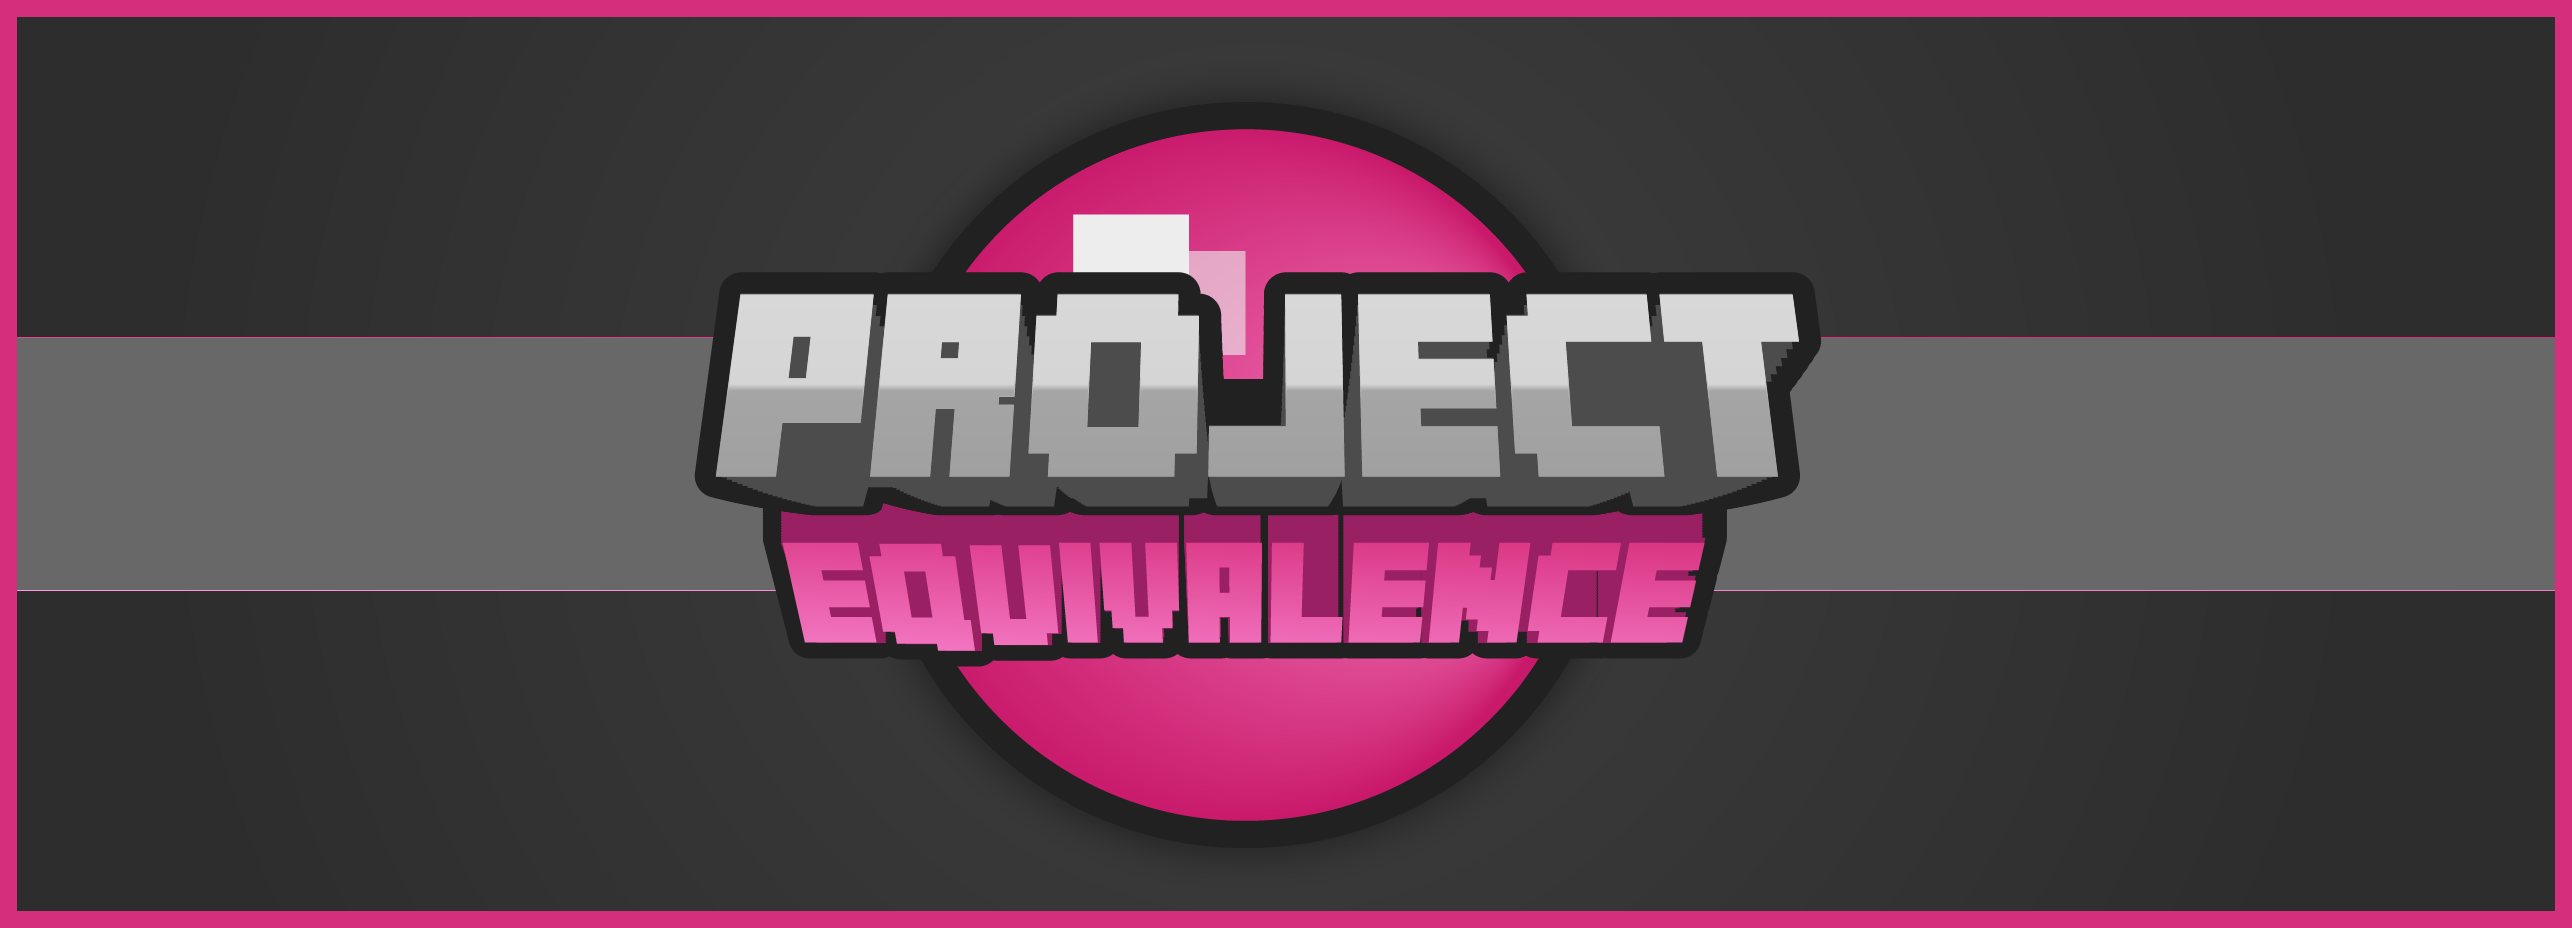 Project Equivalence Modpacks Minecraft Curseforge